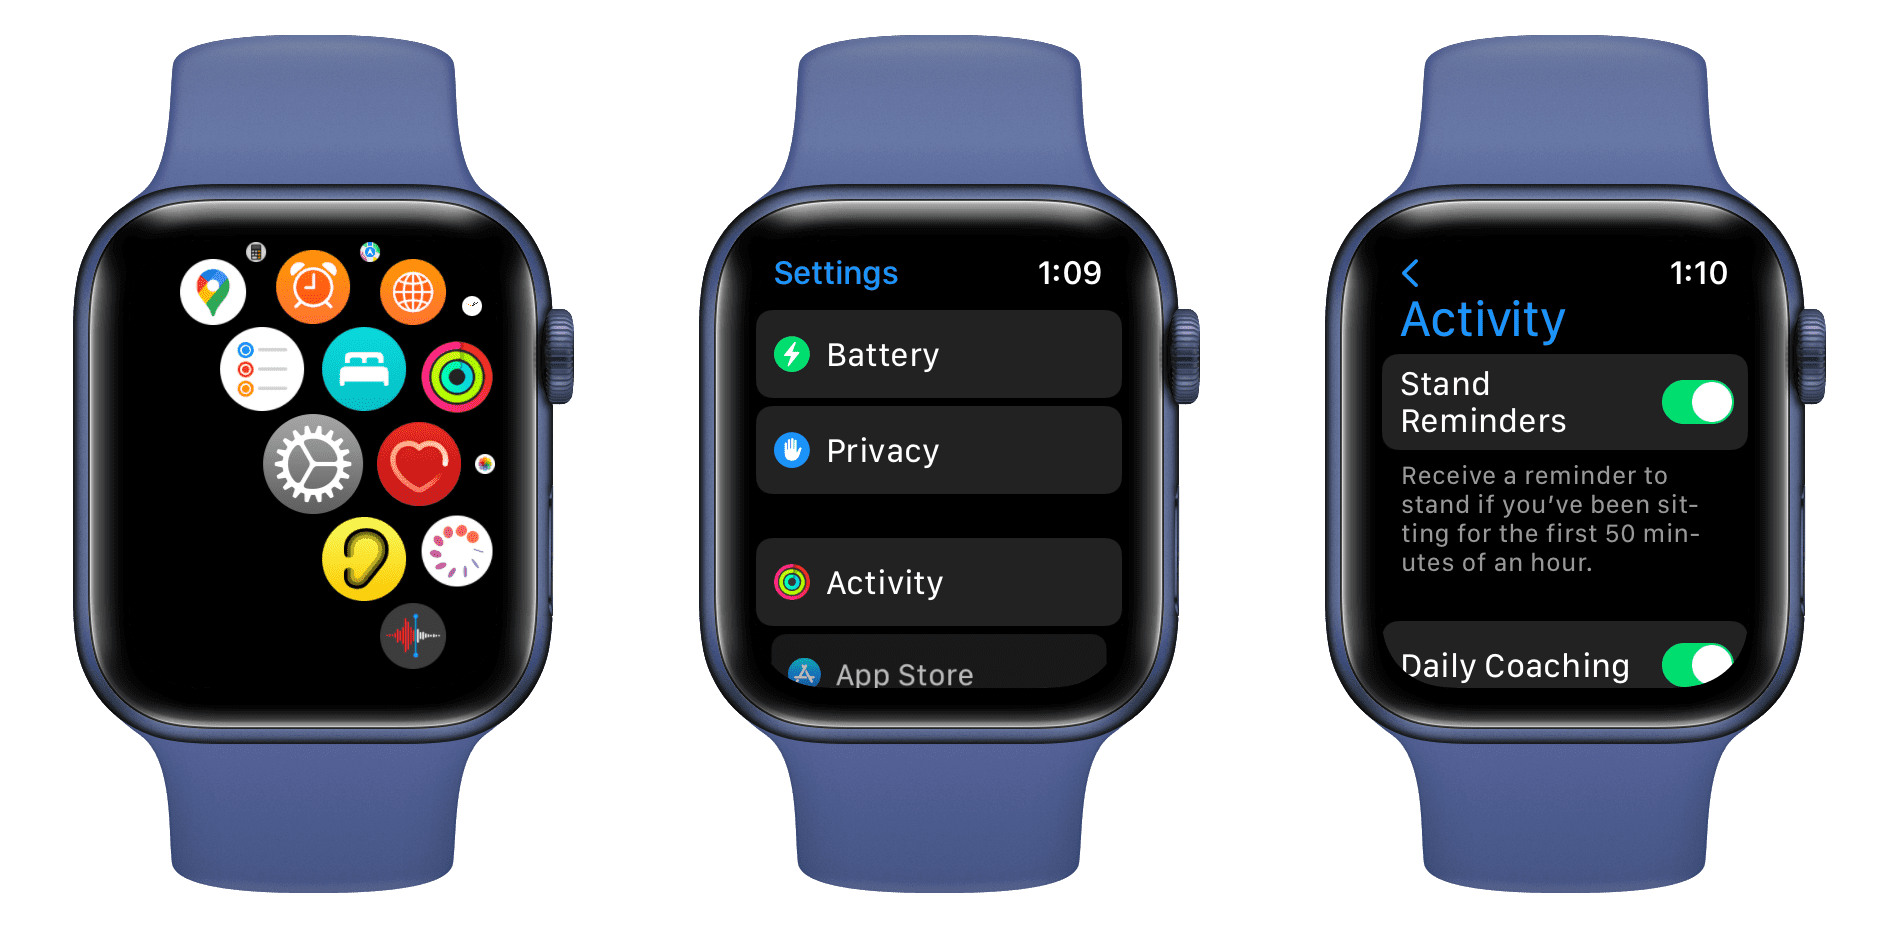 Enable Stand Reminders on Apple Watch